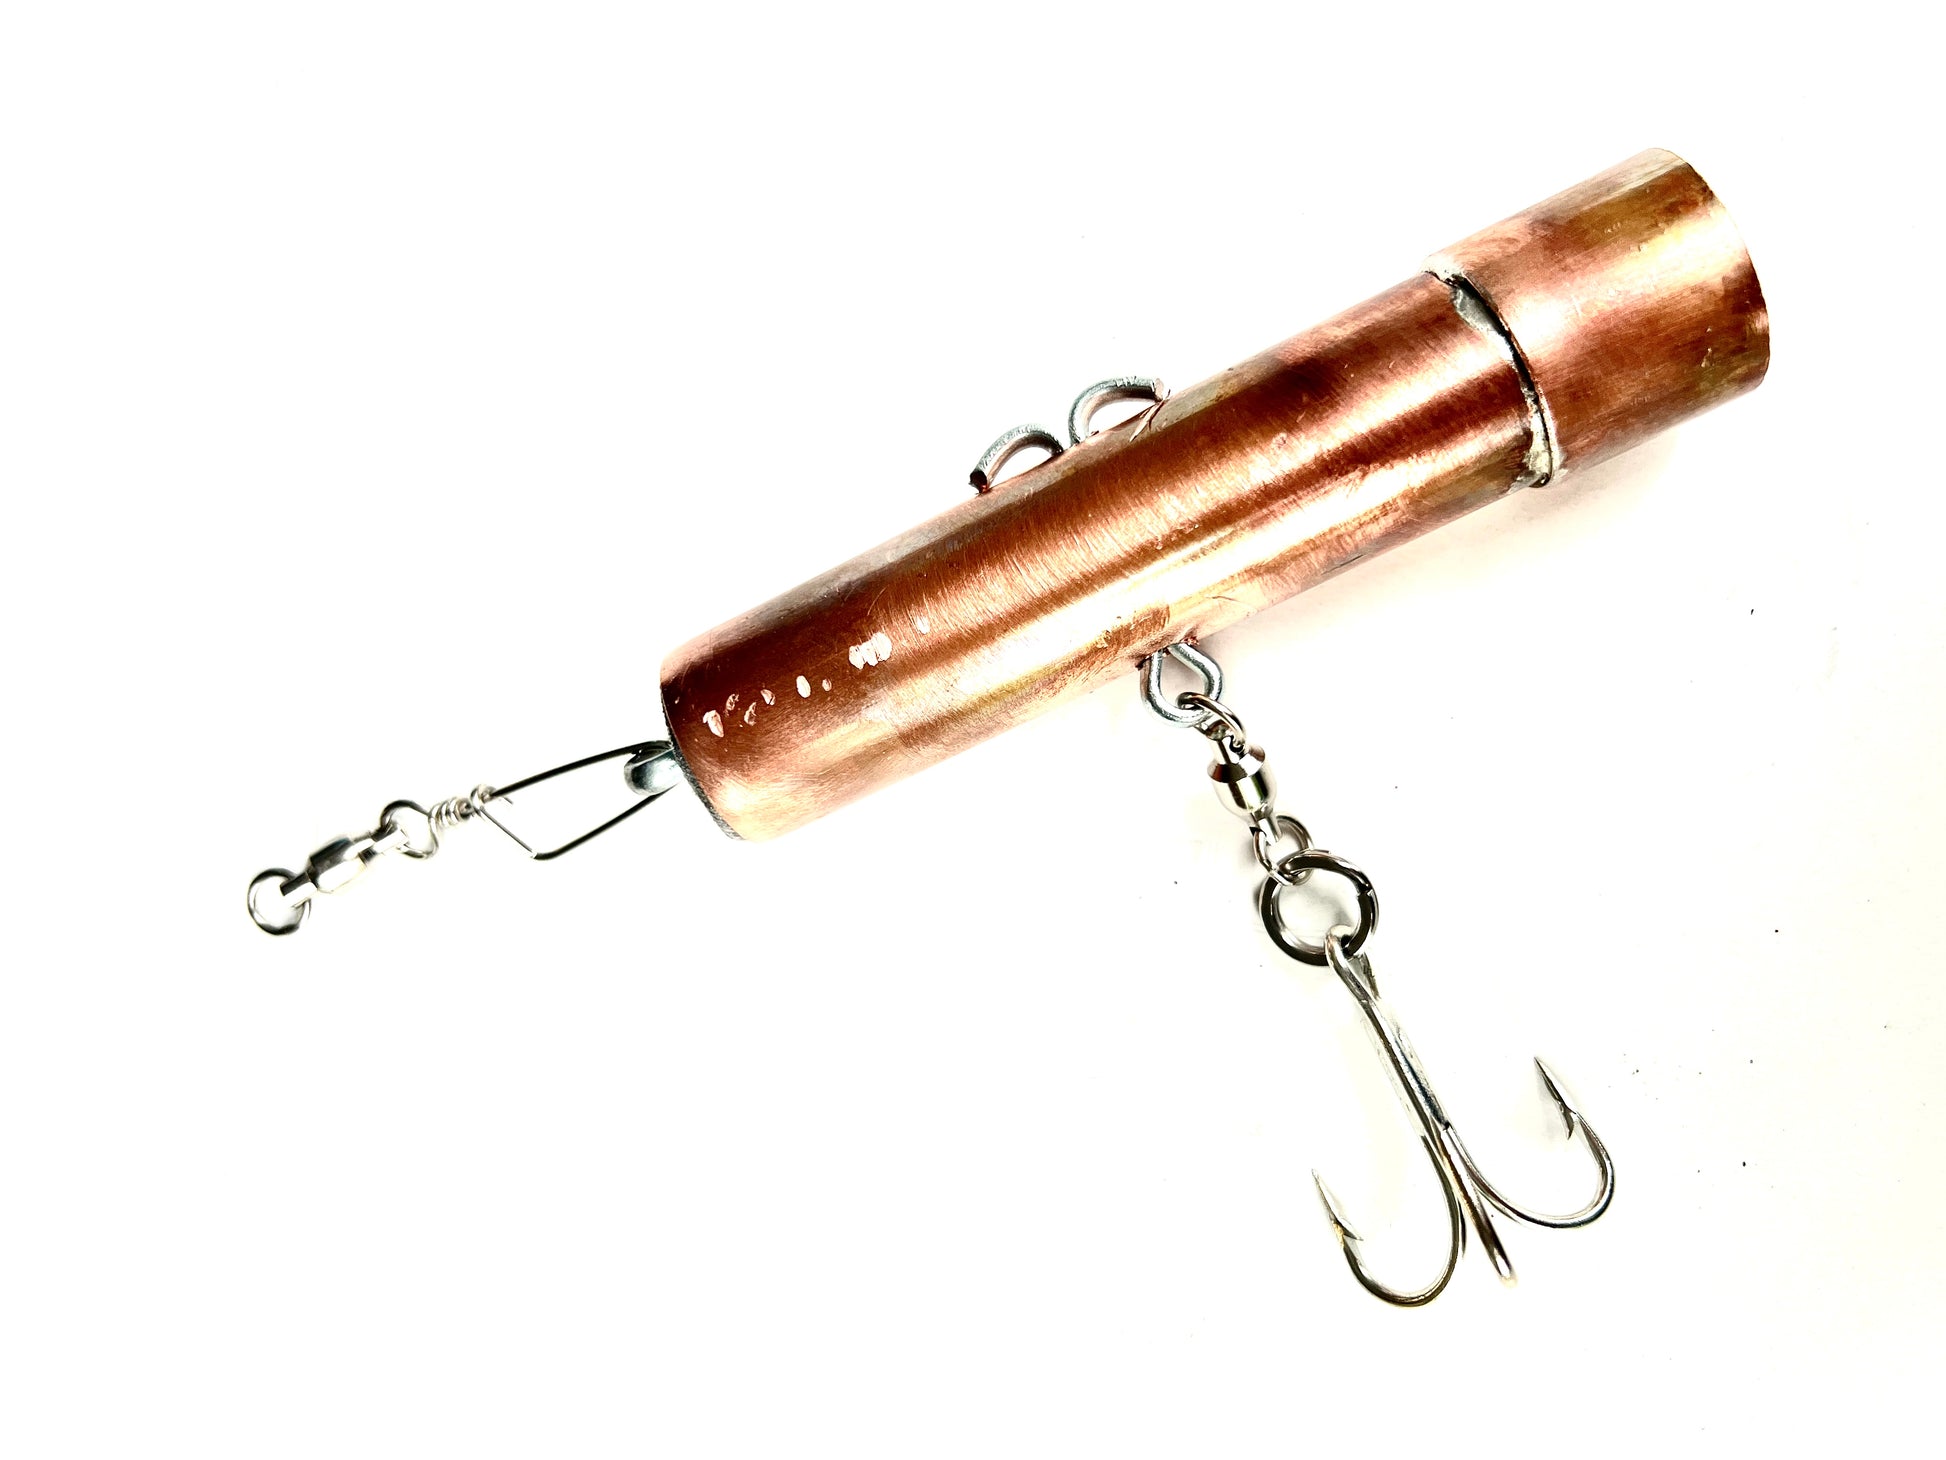 Rock Fishing Lures and pipe jigs for halibut, lingcod, and rockfish. –